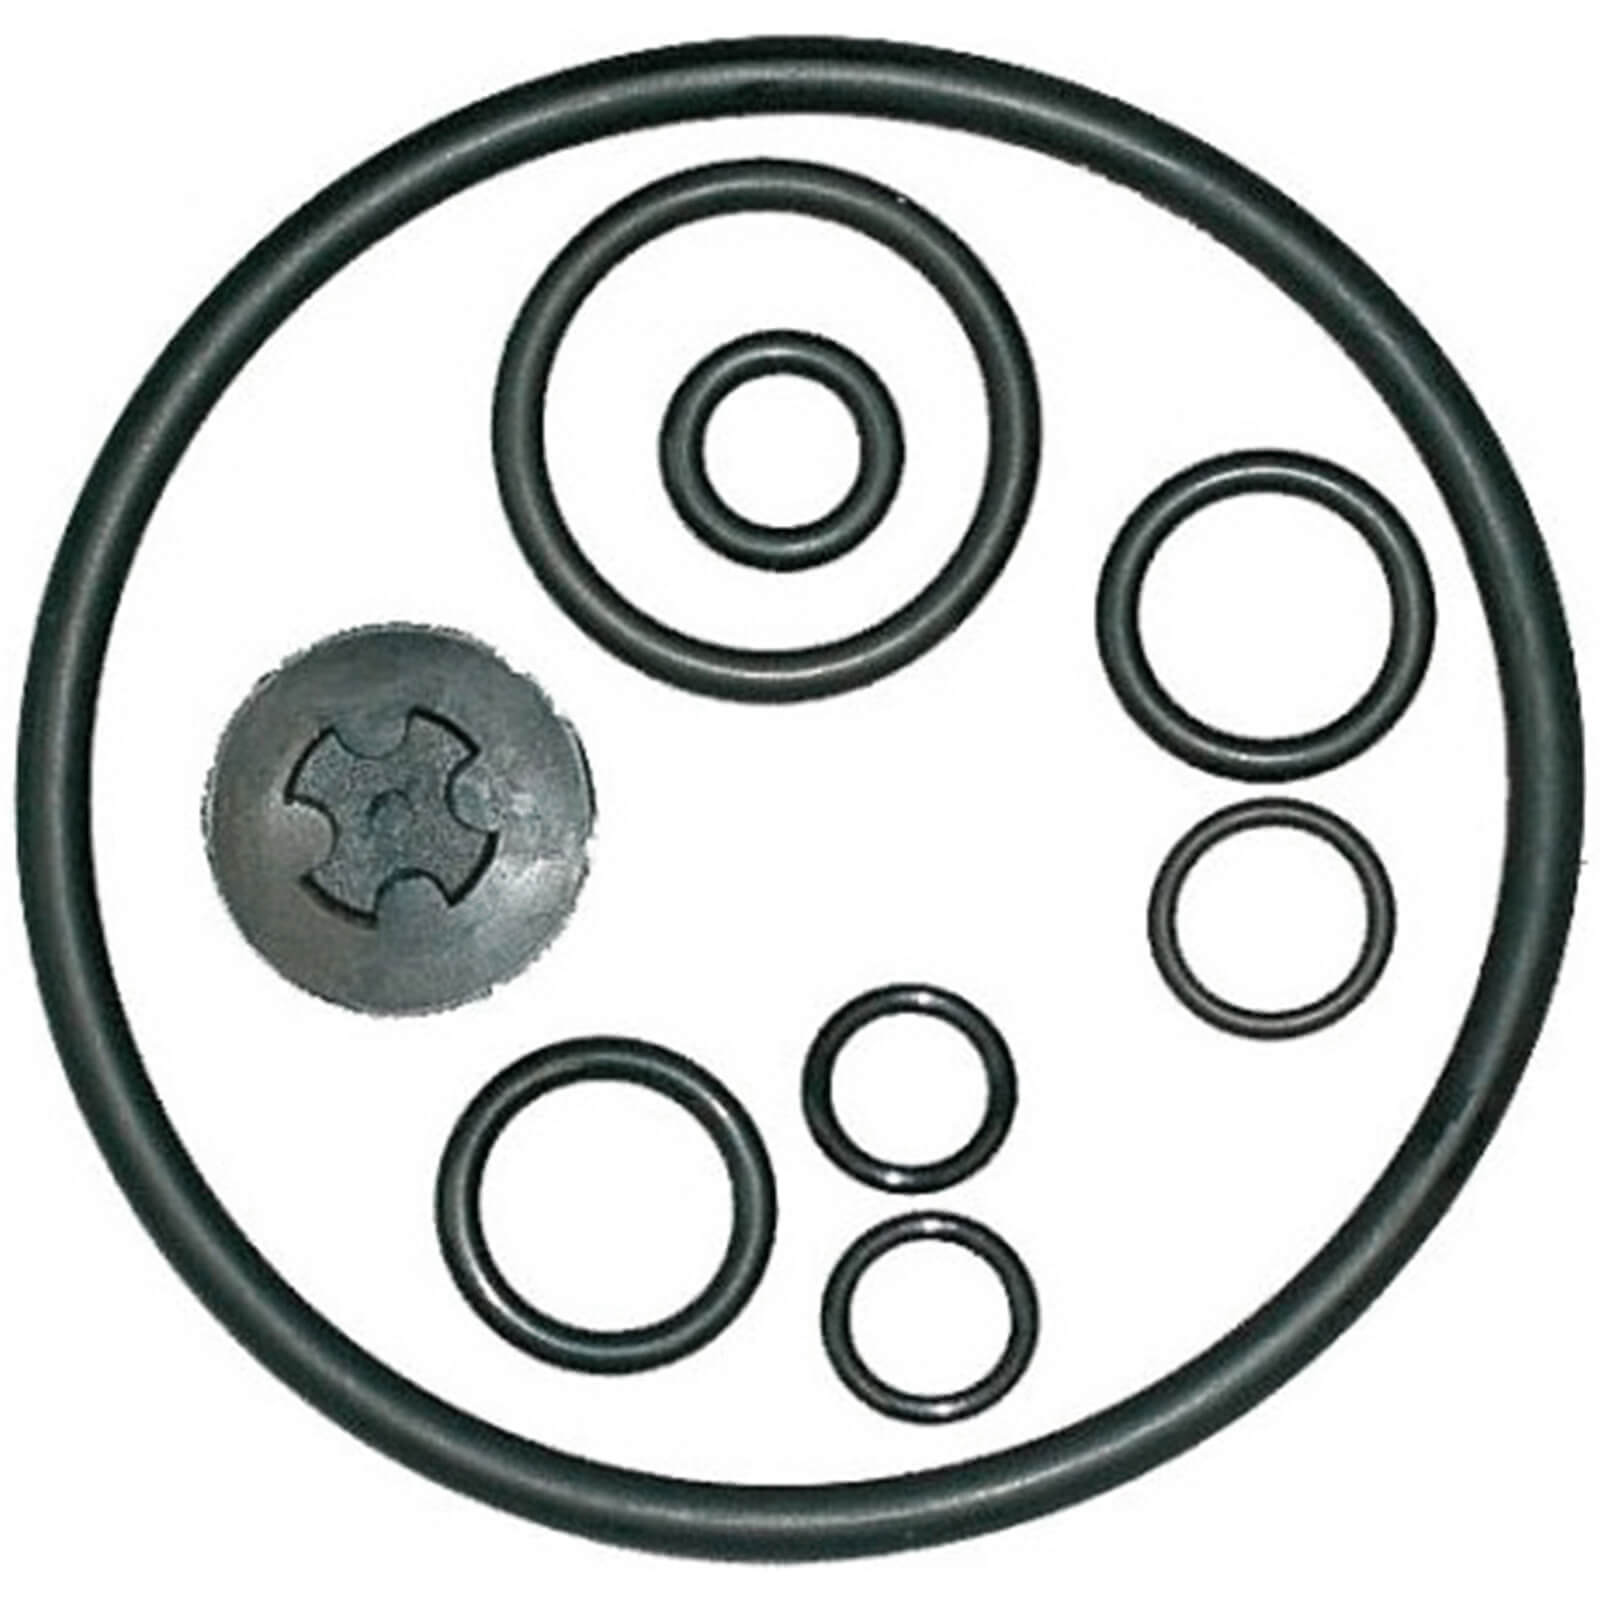 Image of Solo FKM Gasket Kit for 456,457 and 456Pro Pressure Sprayers